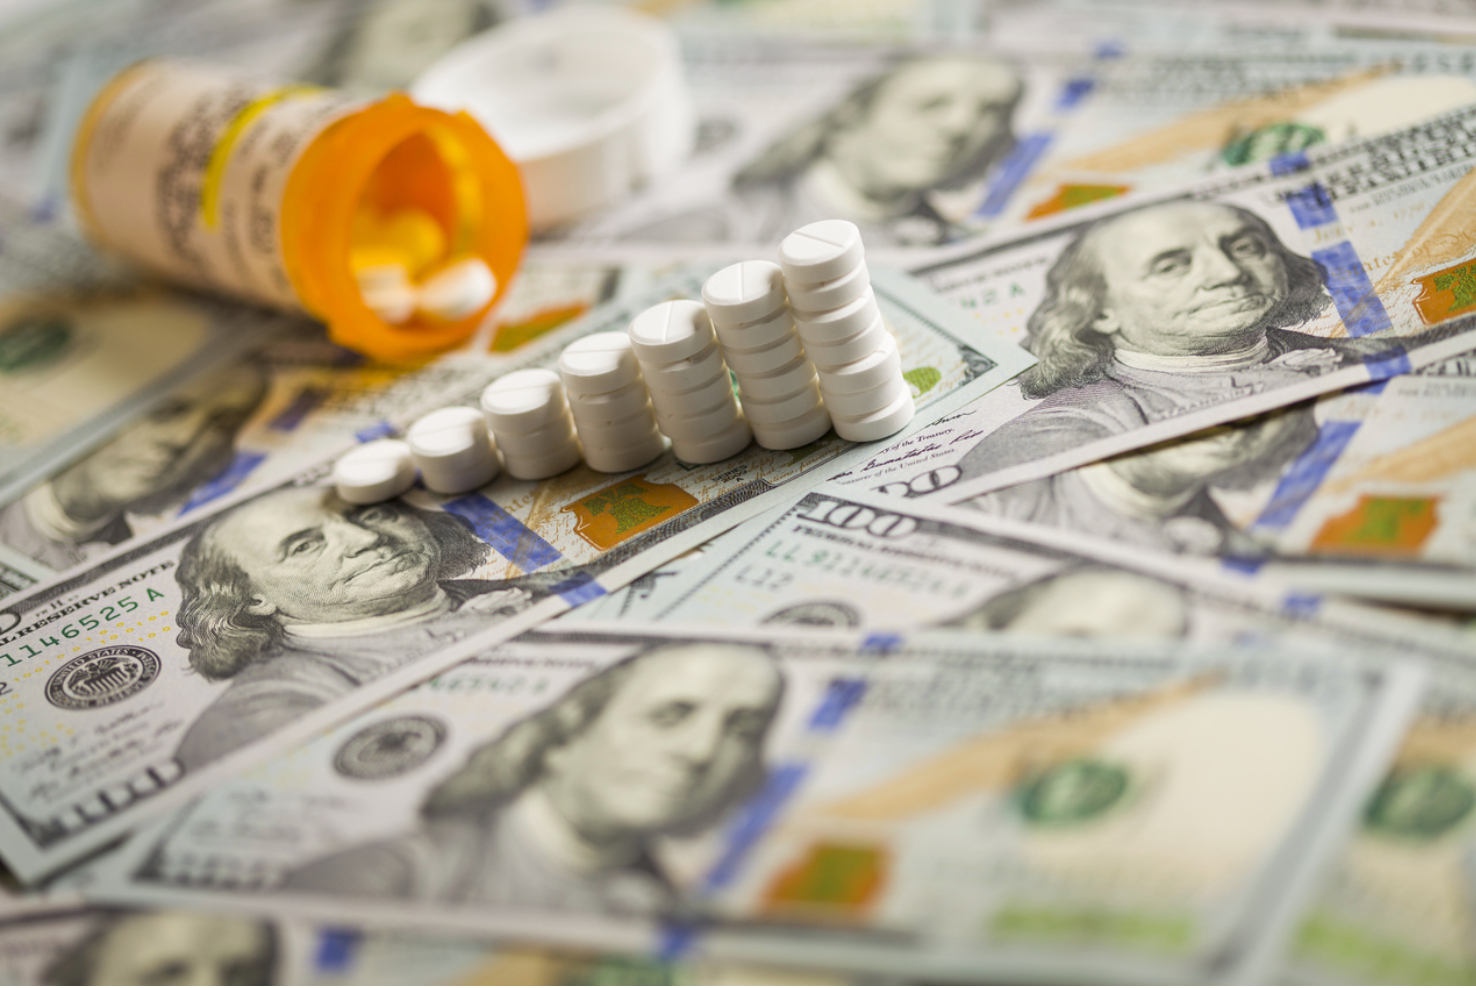 New Analysis Associates Integrated Specialty Pharmacy With Lower Total Cost of Care